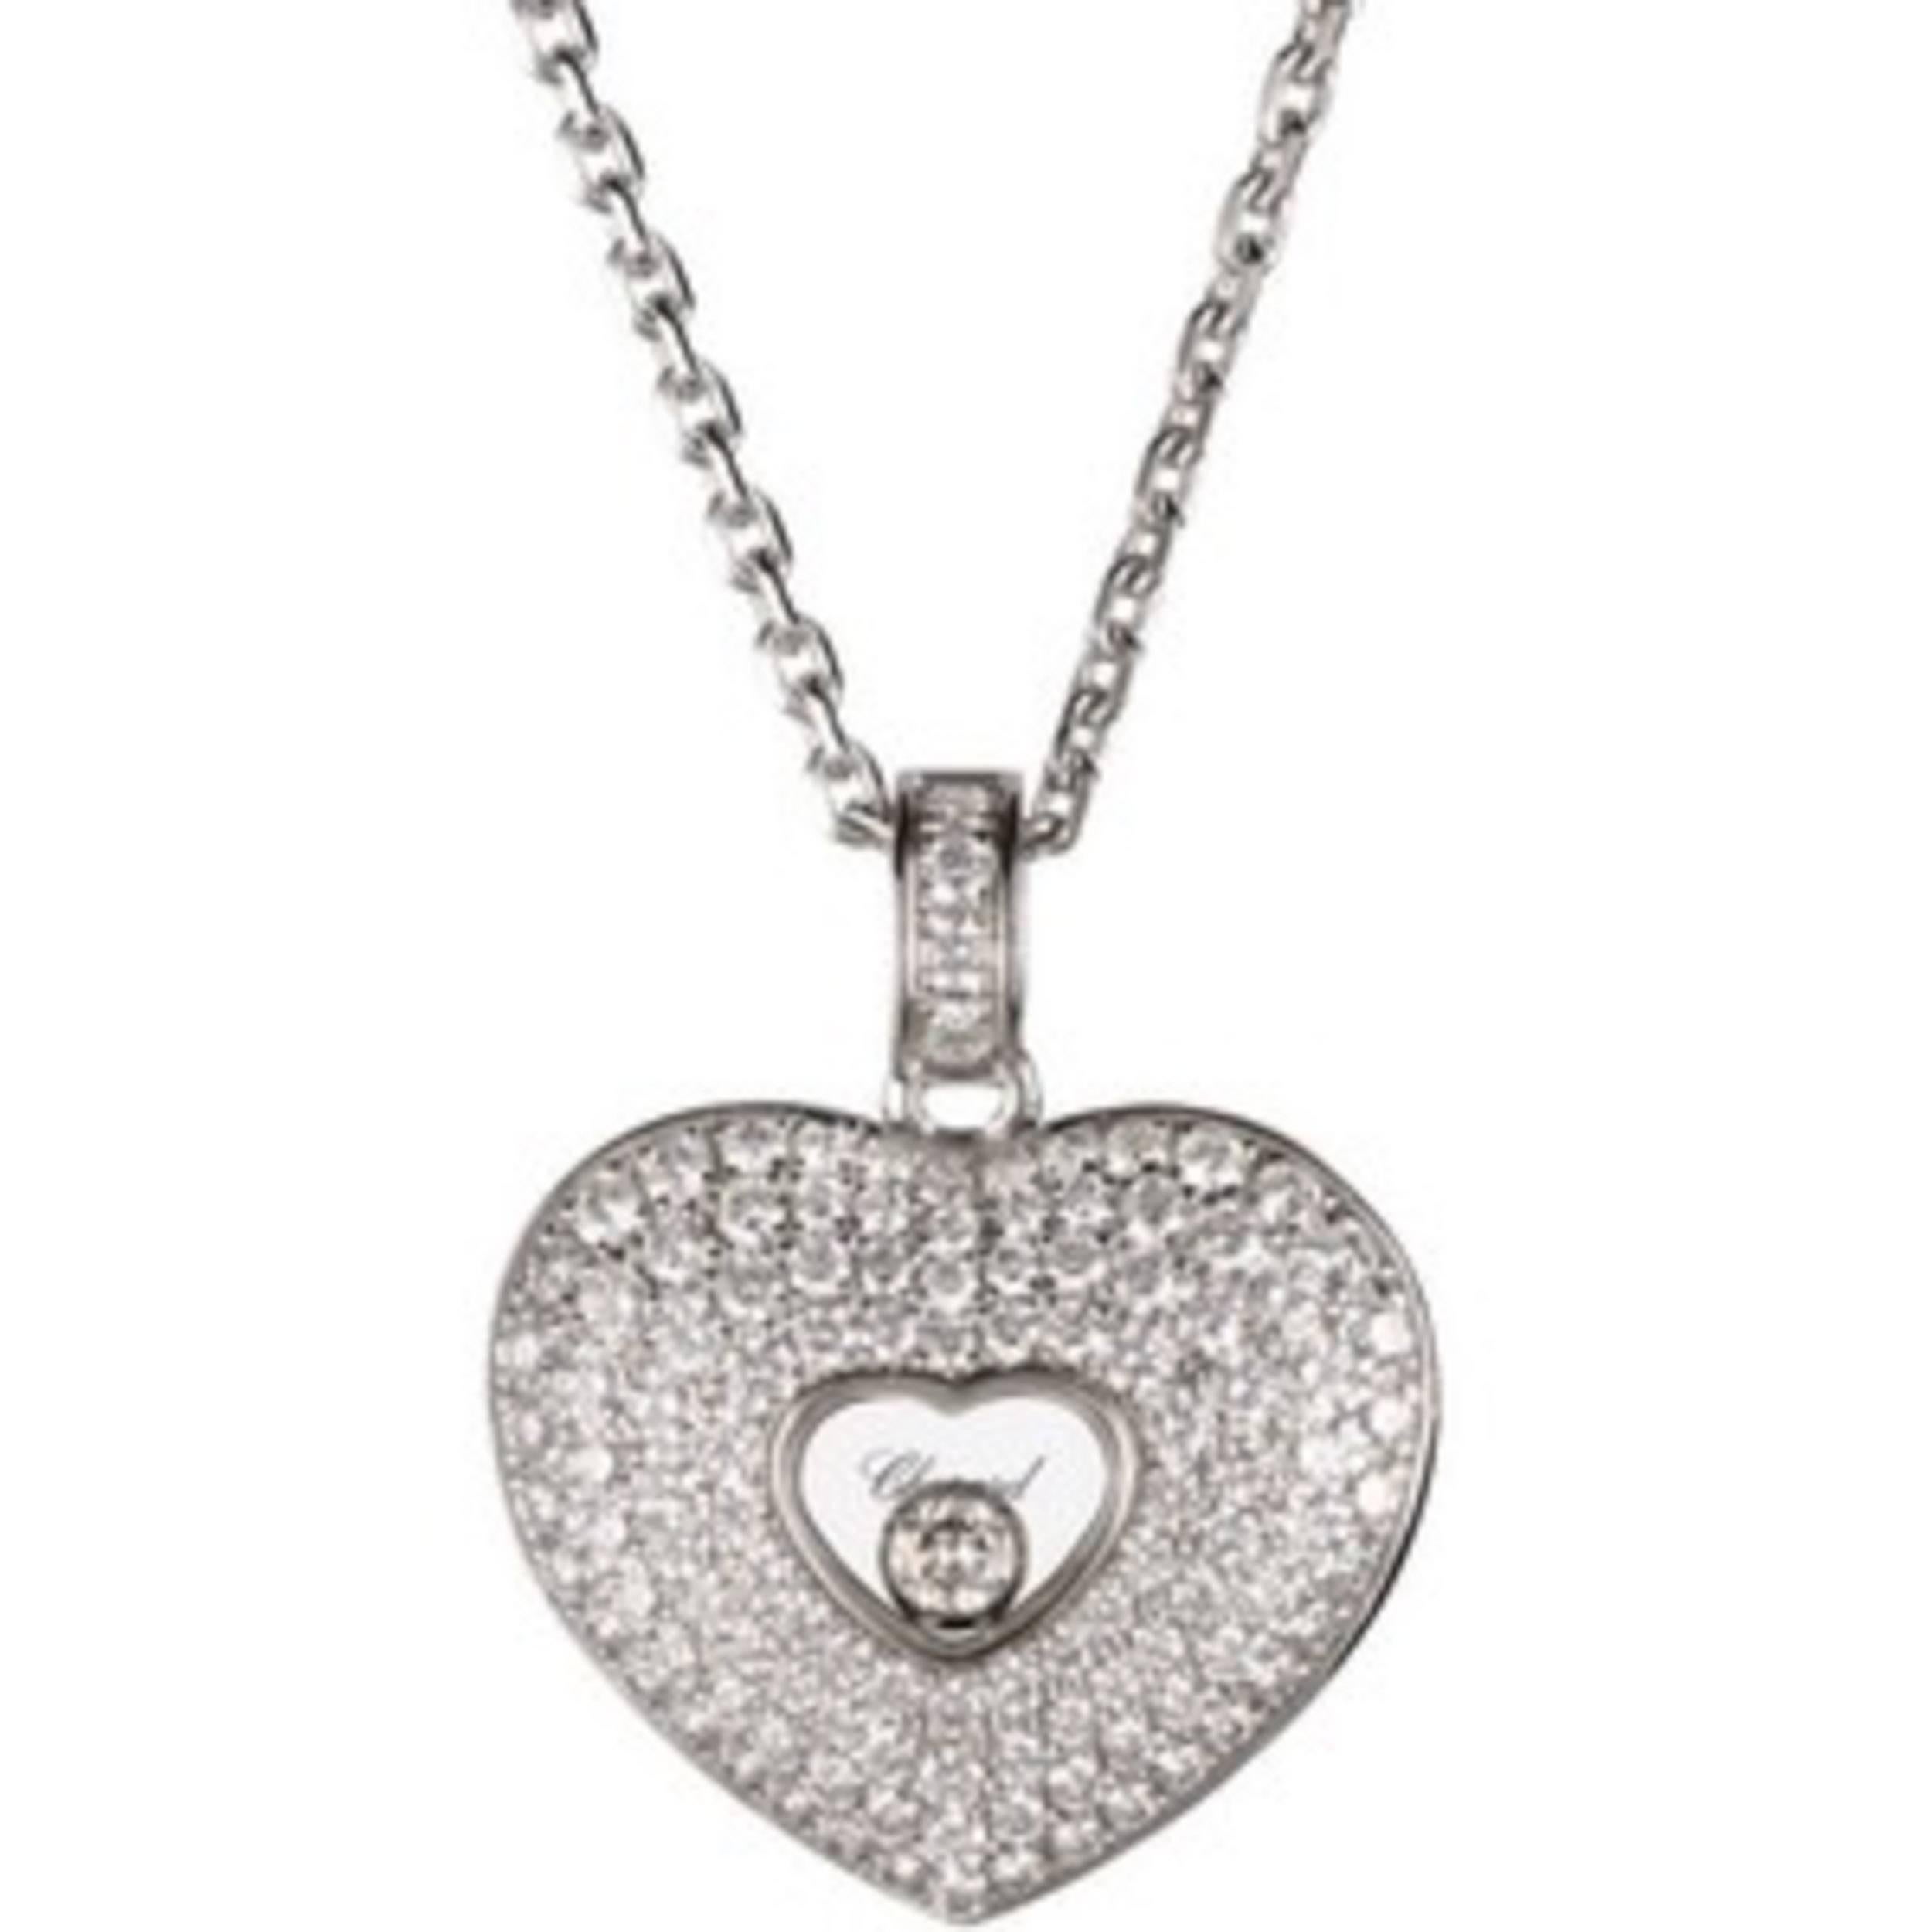 Truly beautiful Diamond Pave Heart Pendant by Chopard. Happy Diamonds collection, combining the feminine style with jewelry excellence. This heart-shaped pendant in 18k white gold is pave set with 113 diamonds and a single bezel set diamond